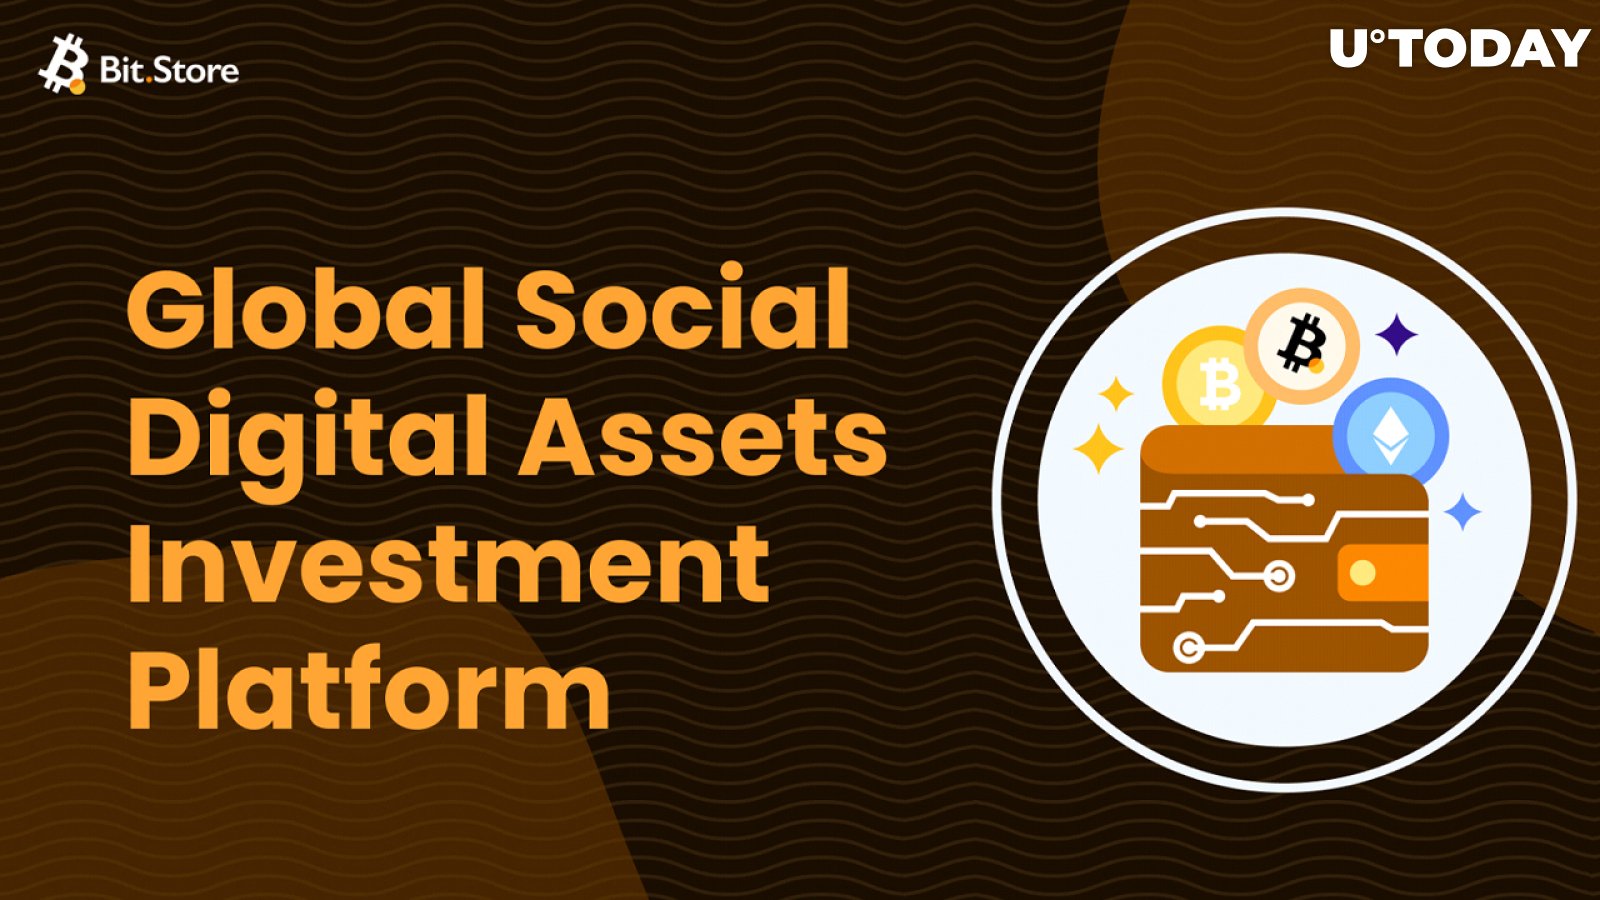 Social Crypto Investment Platform Bit.Store Is an Educational and Fun Entry Point for Novice Investors